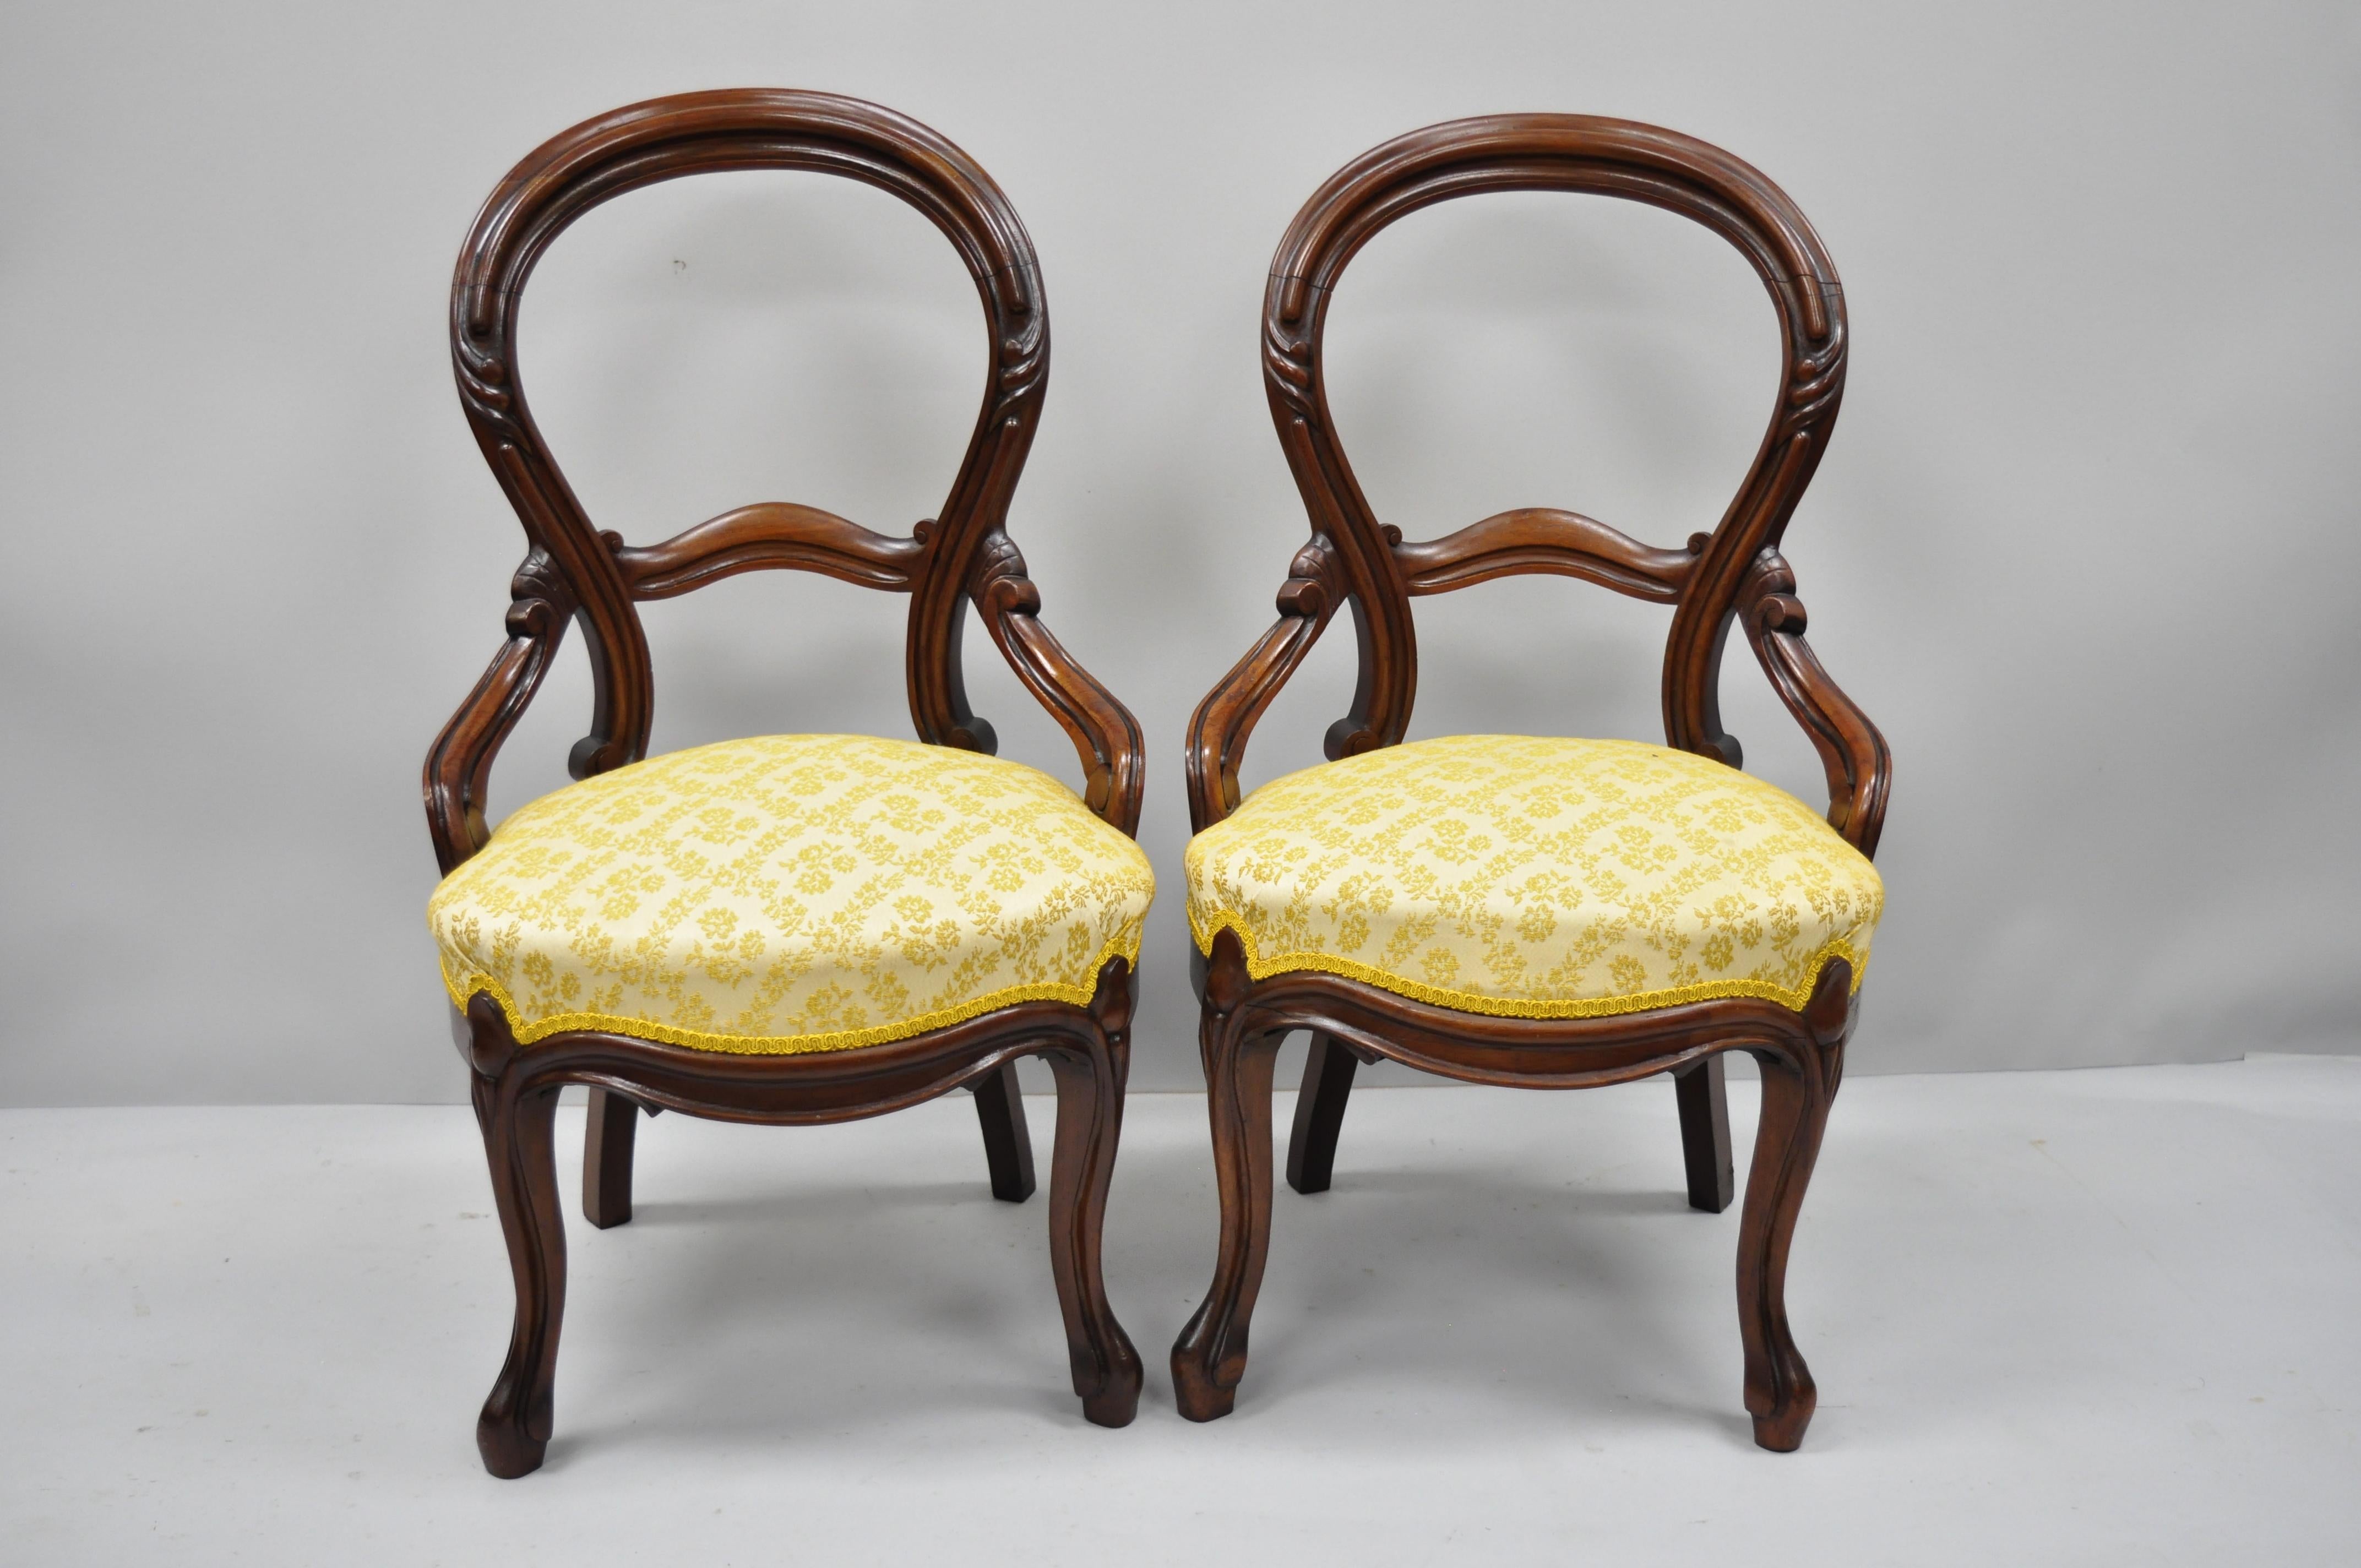 6 antique Victorian carved walnut balloon back parlor dining chairs. Listing includes solid wood construction, beautiful wood grain, and cabriole legs; very nice antique item, circa mid-late 1800s. Measurements: 34